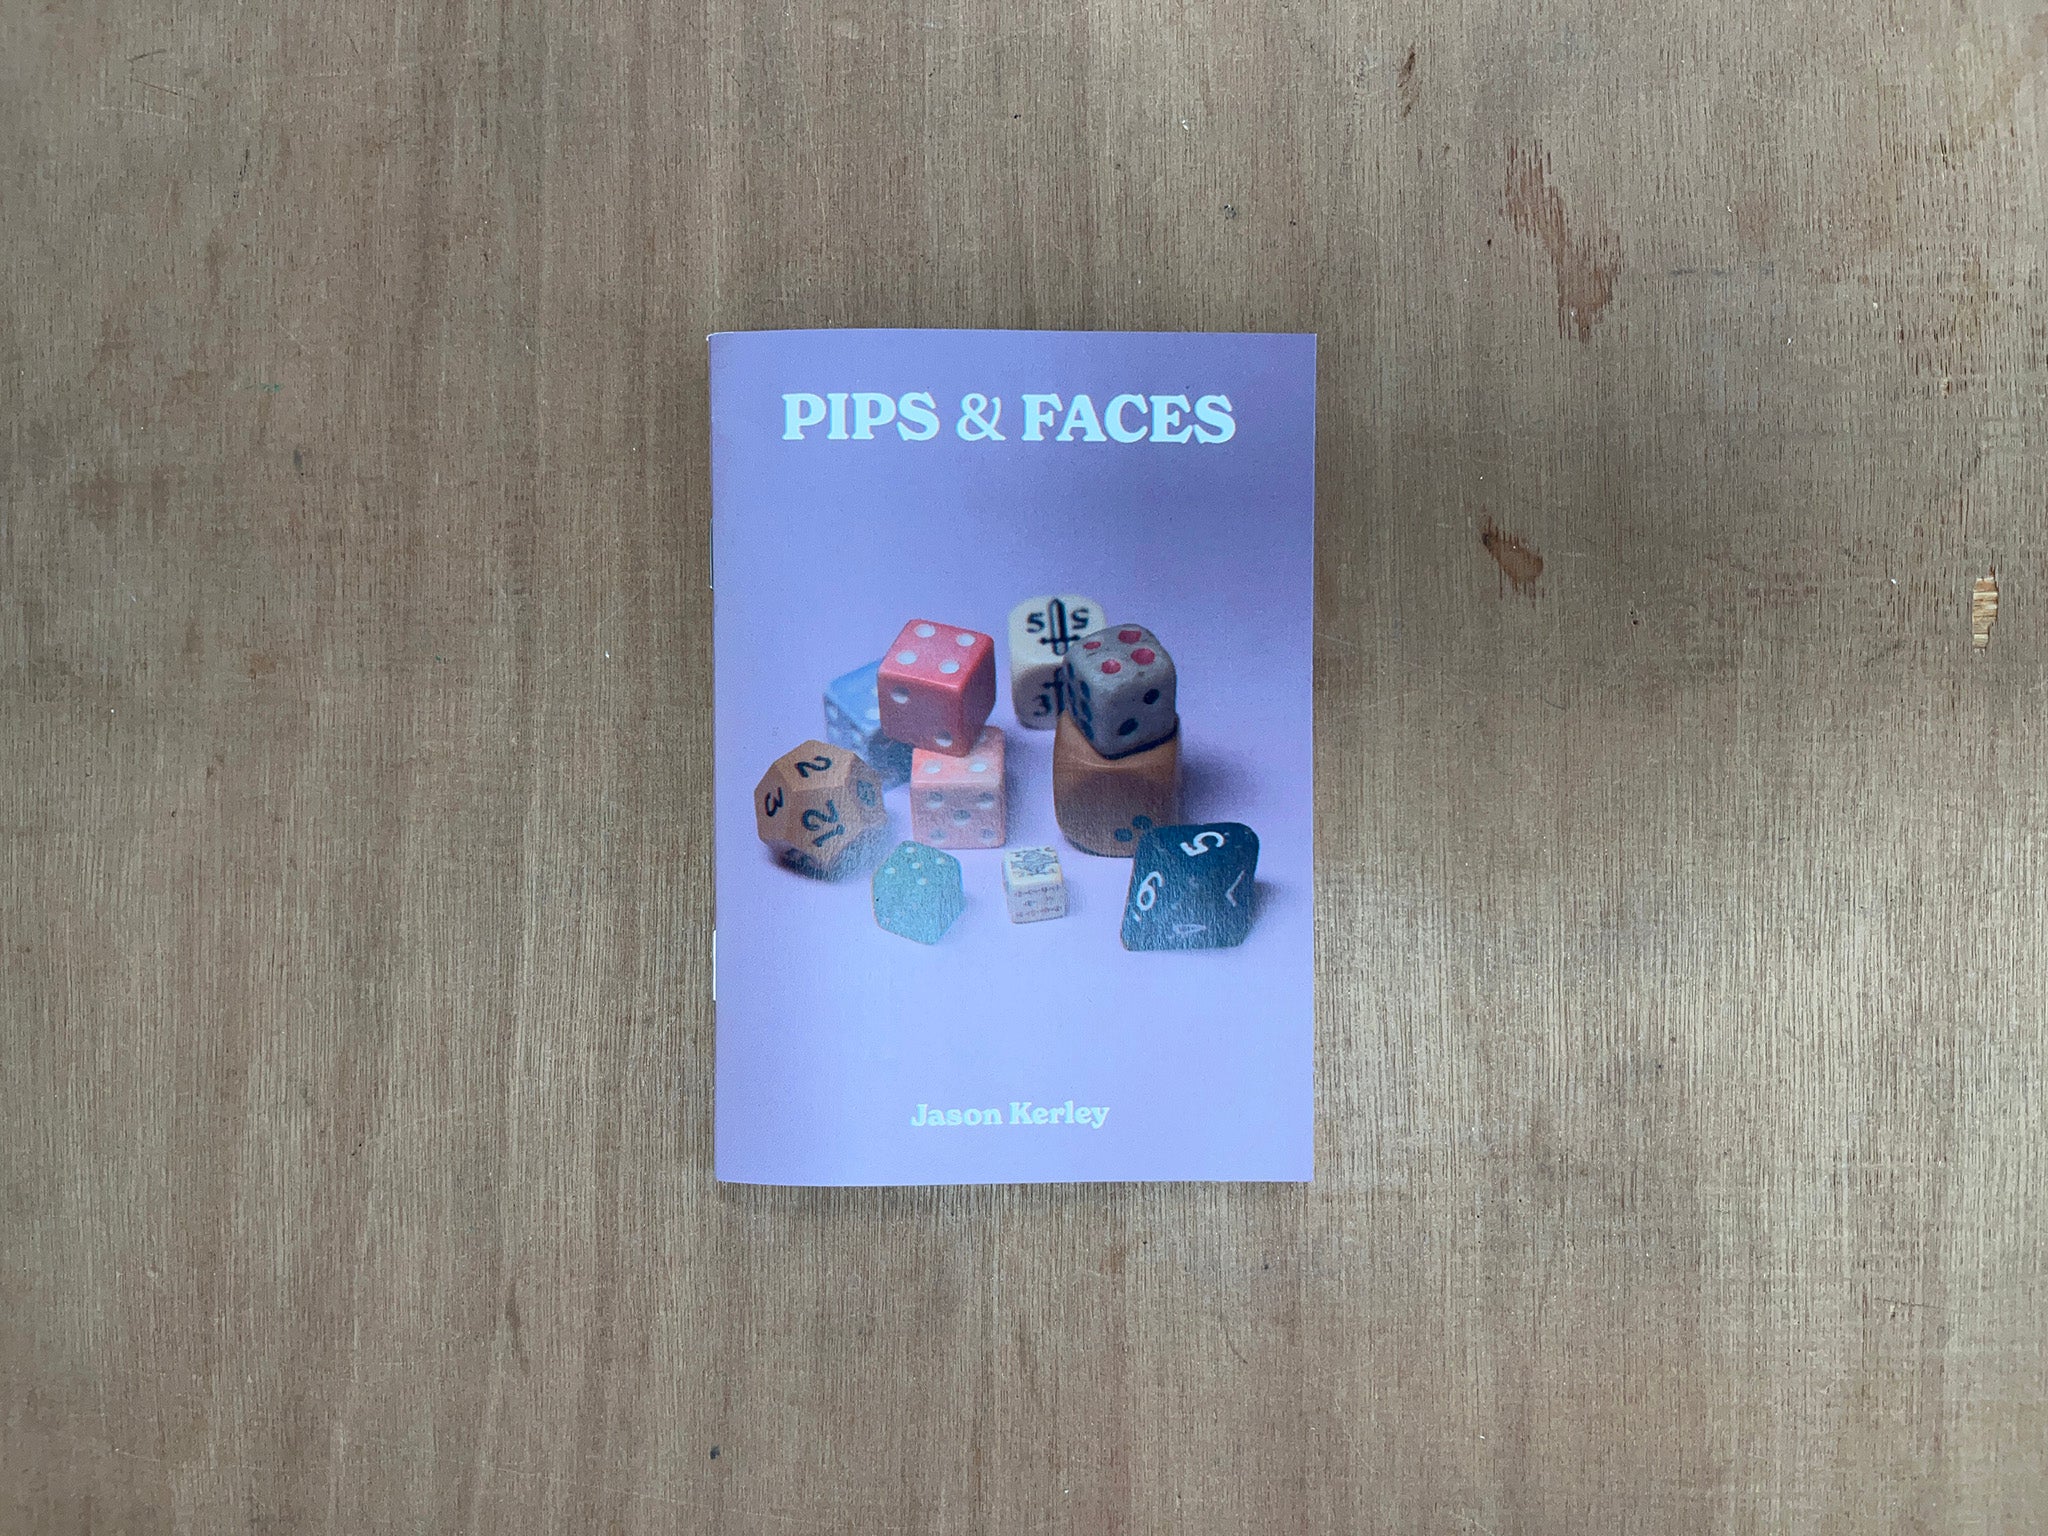 PIPS & FACES by Jason Kerley